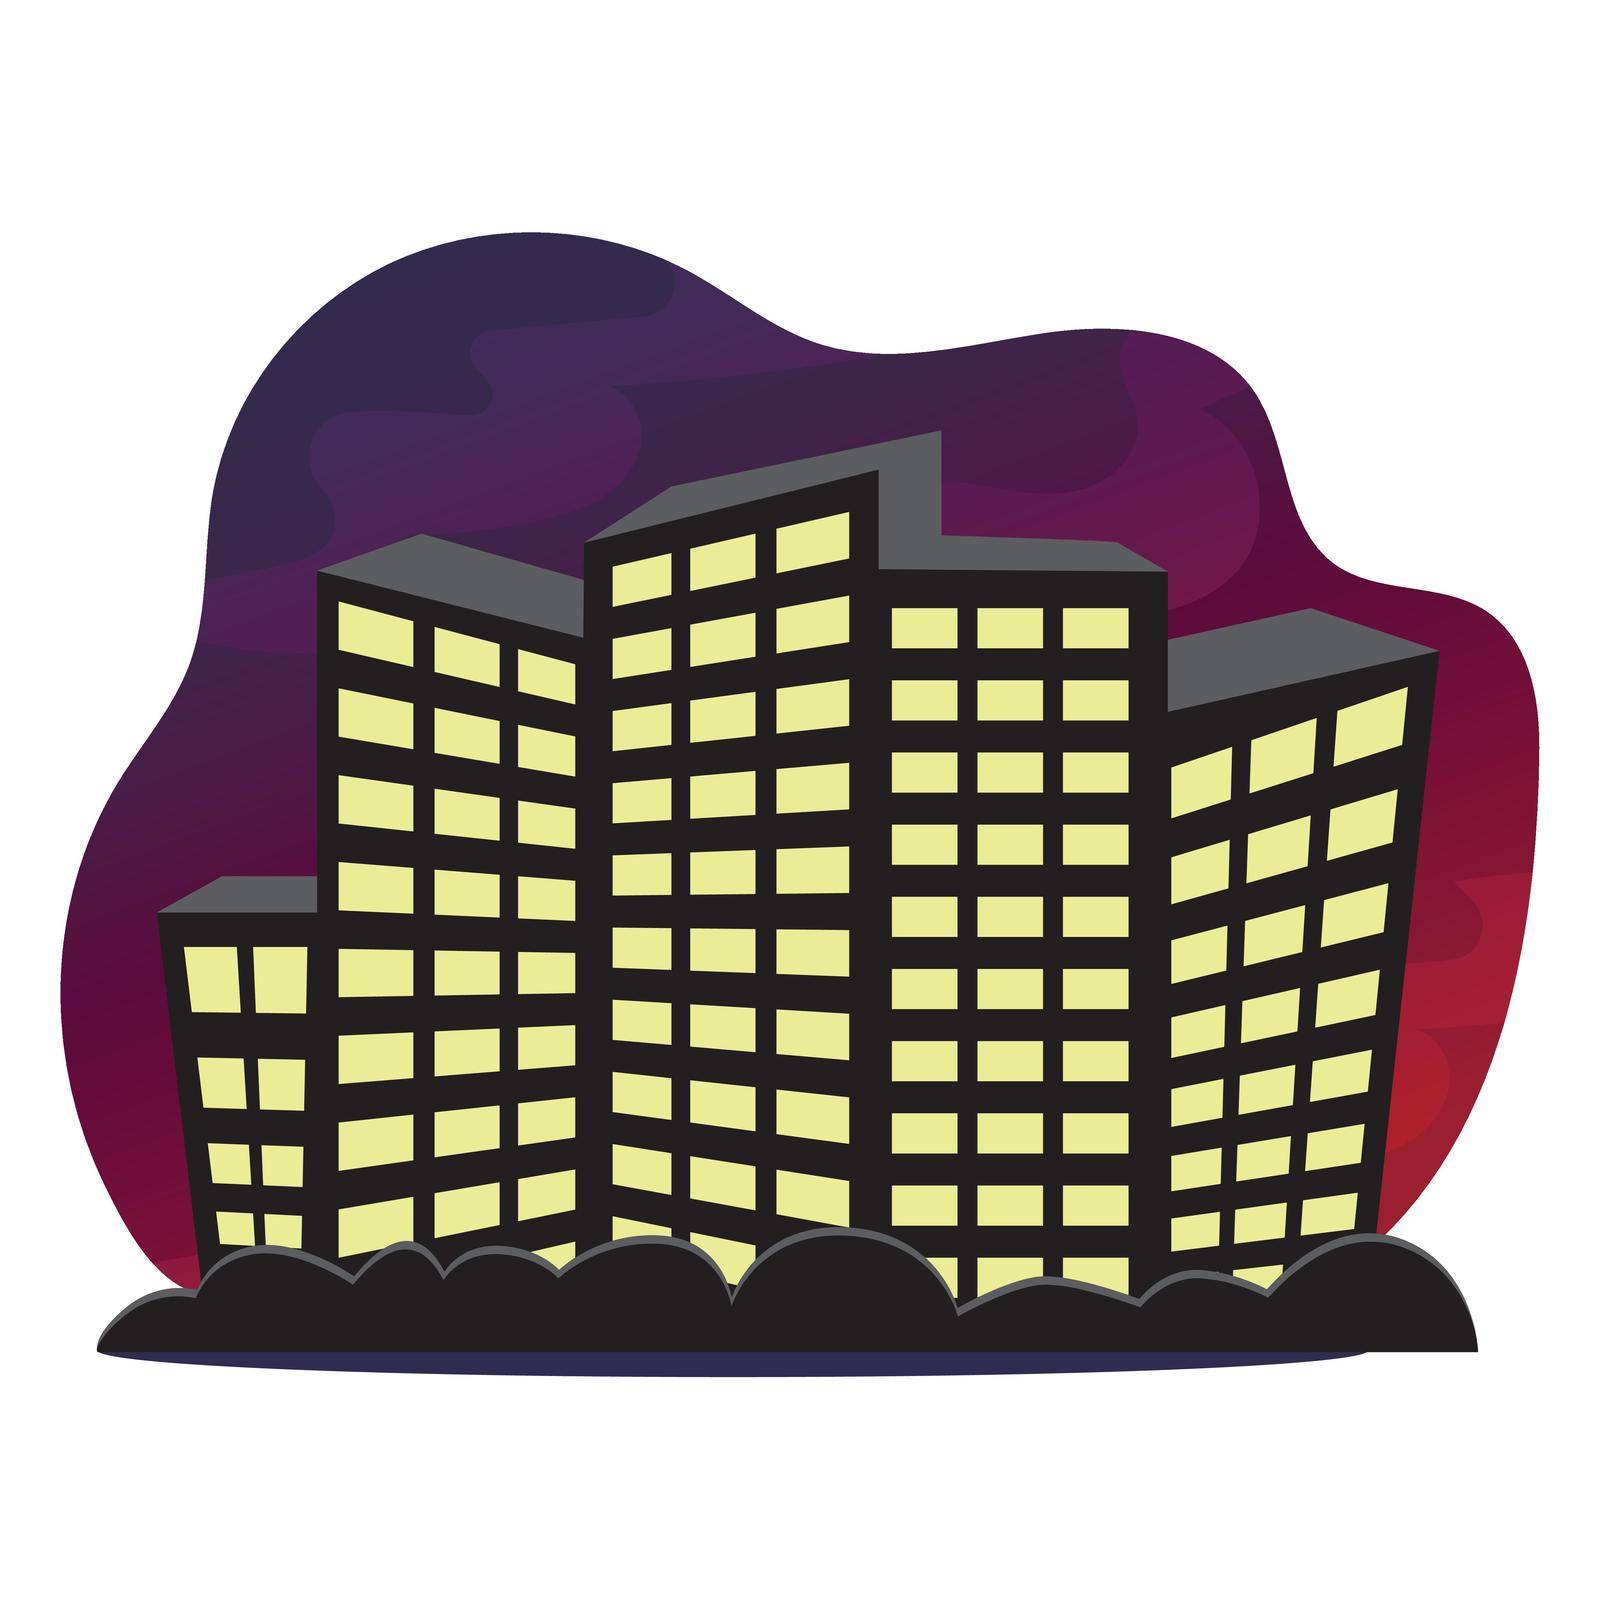 City skyscrapers with bushes on the night sky isolated in a bubble. Simple minimalistic metropolis landscape in flat style by Zoya_Zozulya